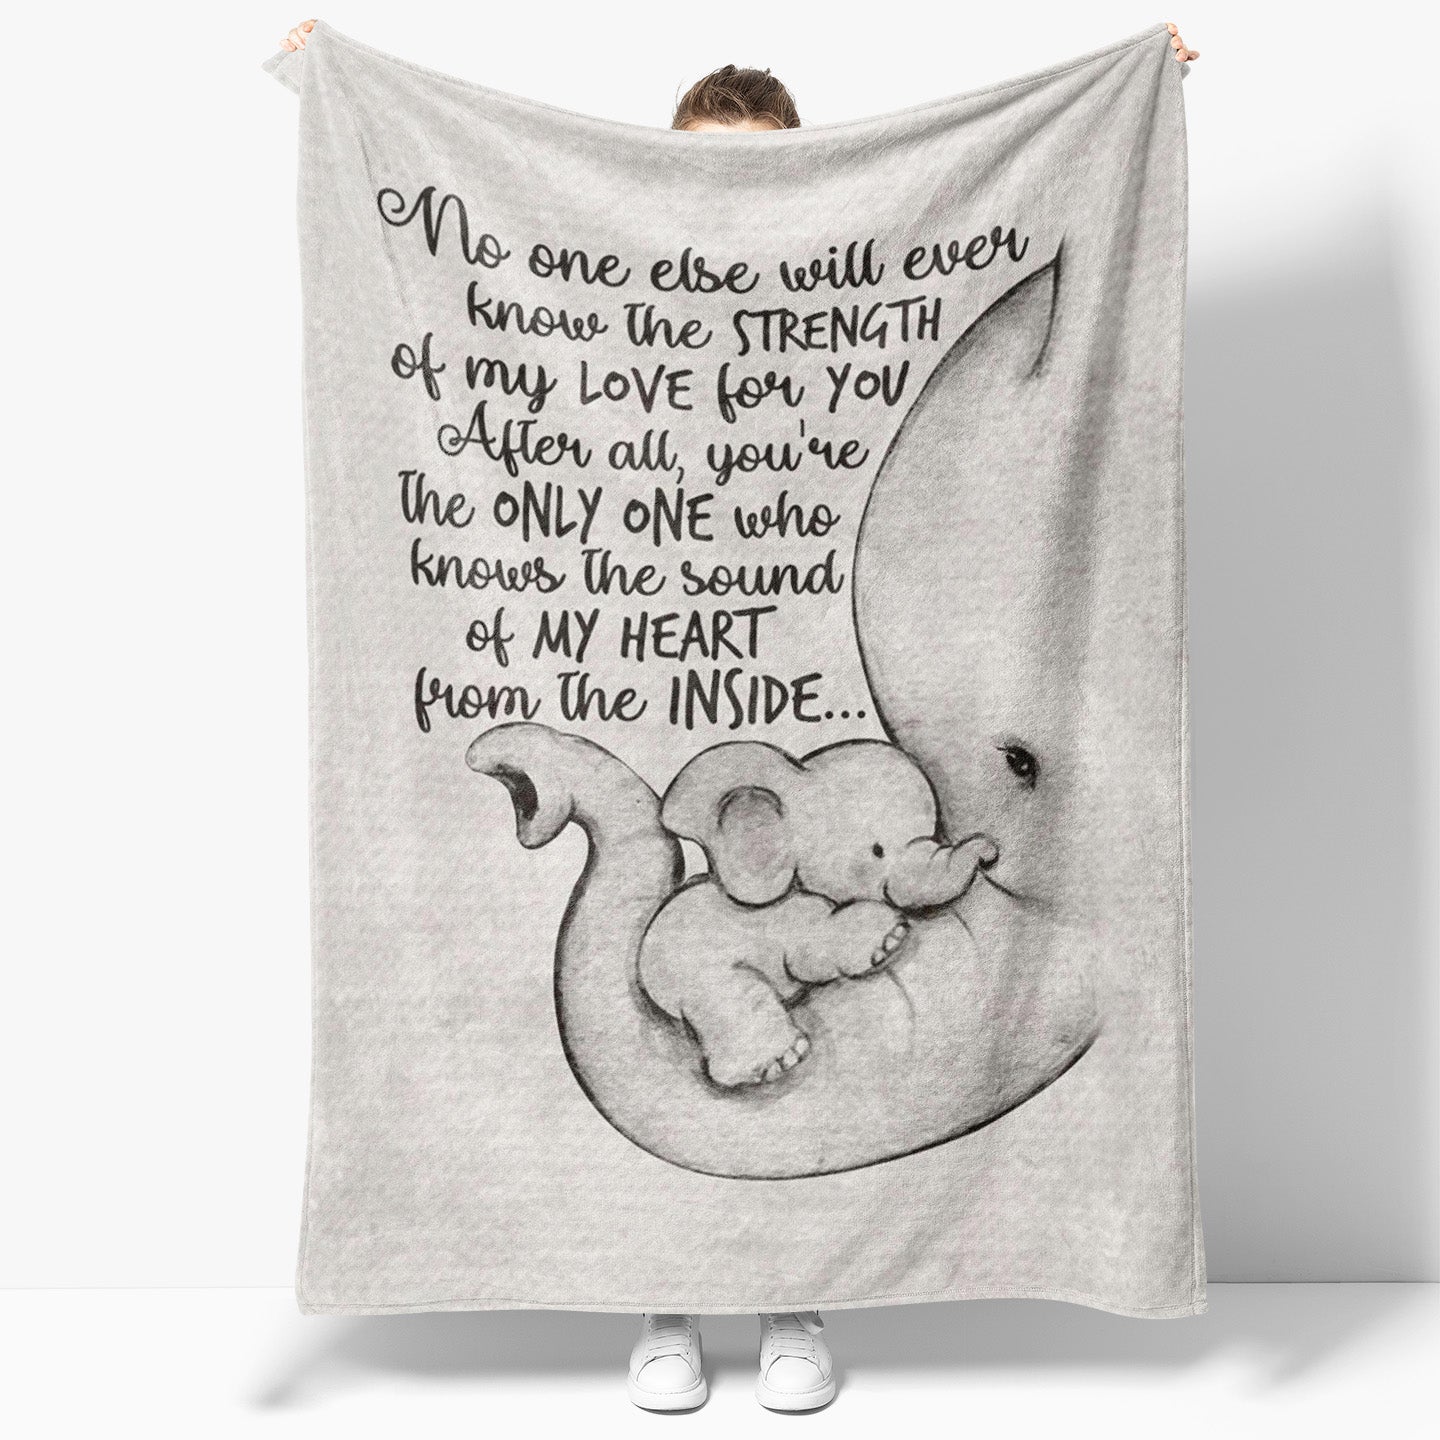 Blanket Gift Ideas For Mom, Thoughtful First Mothers Day Gifts